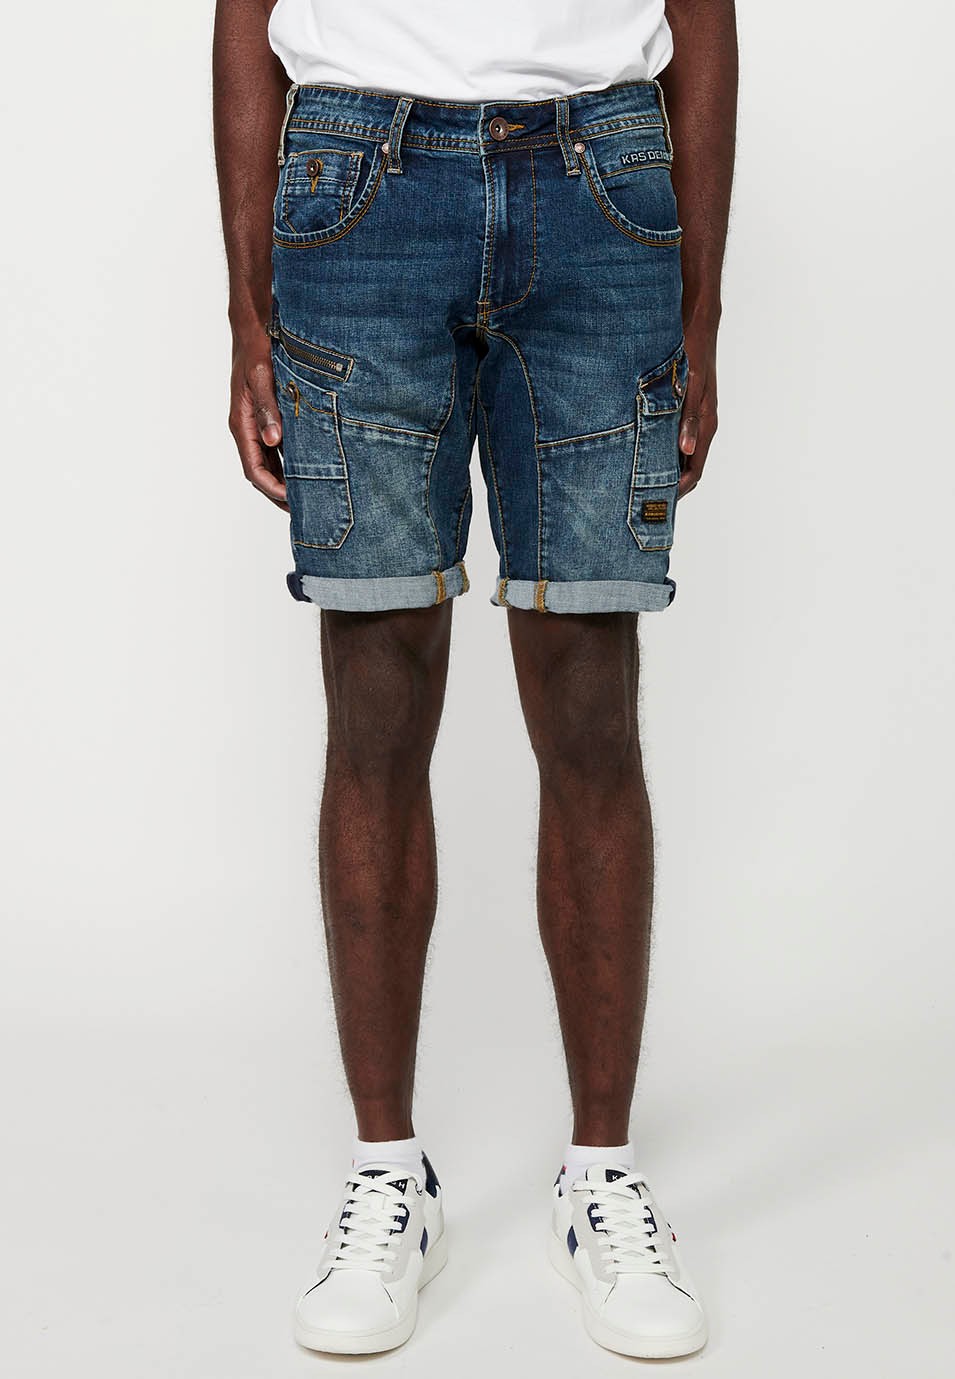 Denim Bermuda Shorts with Turn-Up Finish and Front Zipper and Button Closure with Five Pockets, One Pocket Pocket with Blue Front Details for Men 5